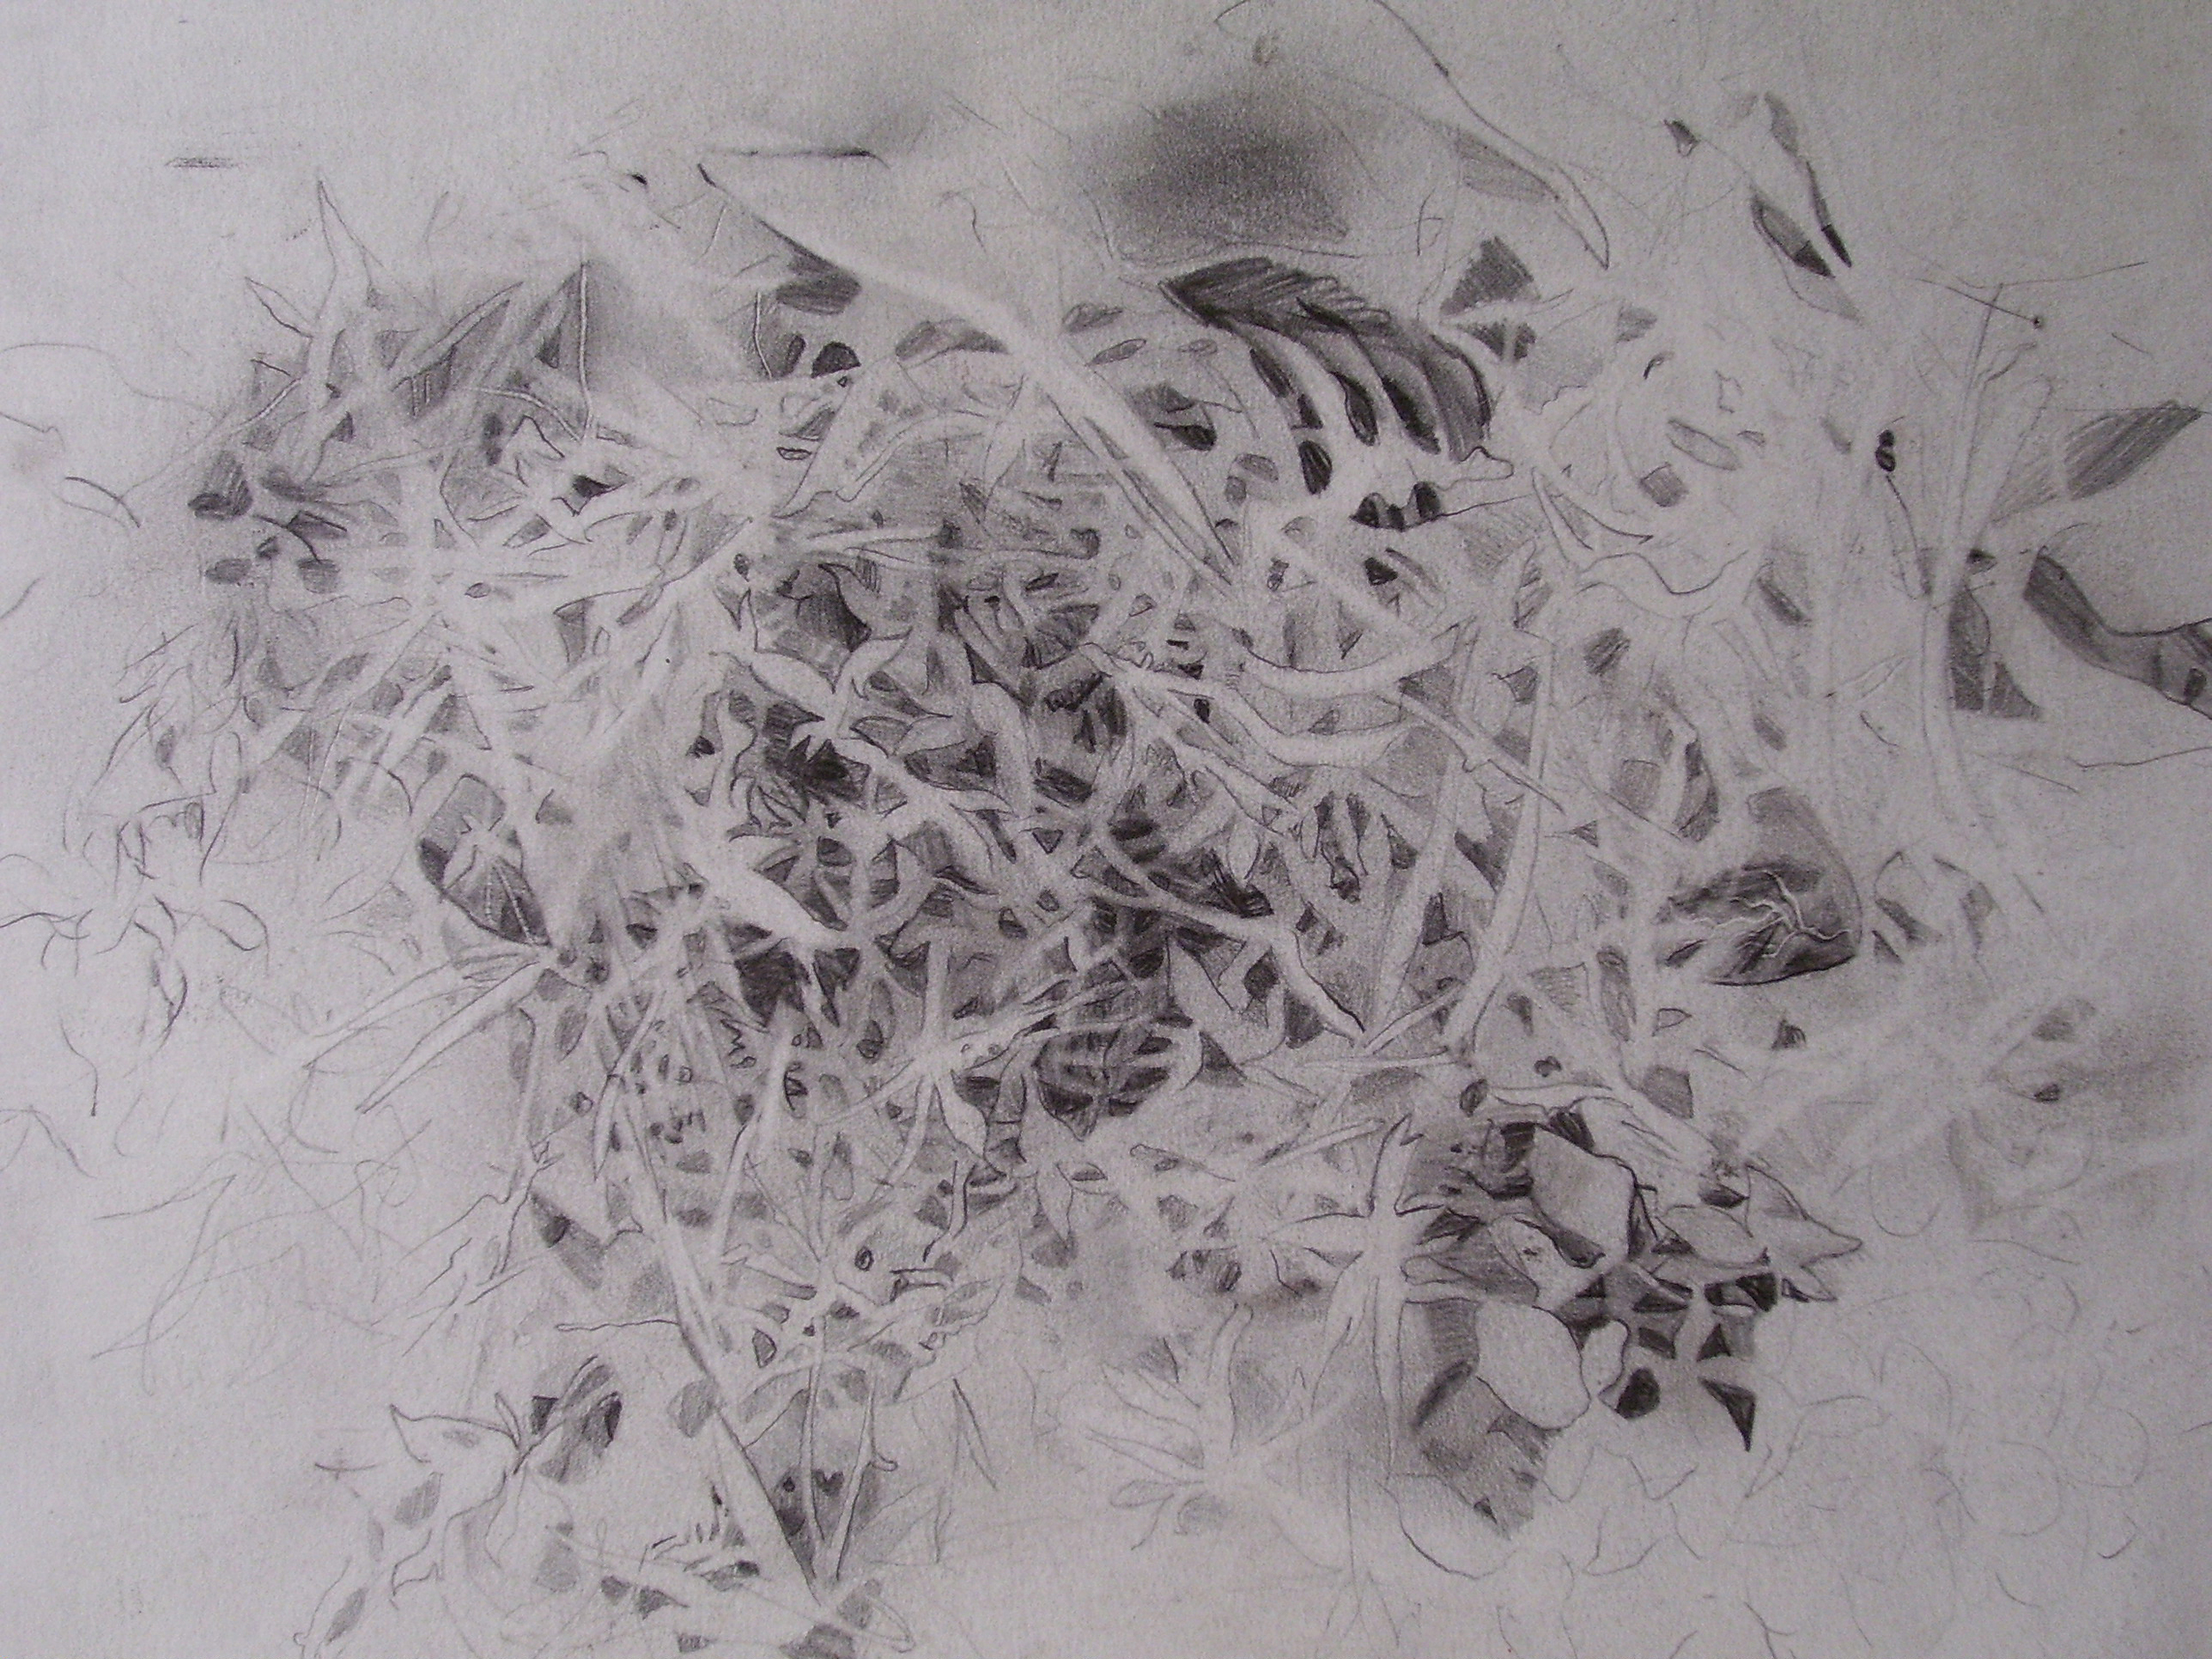  Formation/ 2004/ graphite on paper/ 9 x 12 inches 